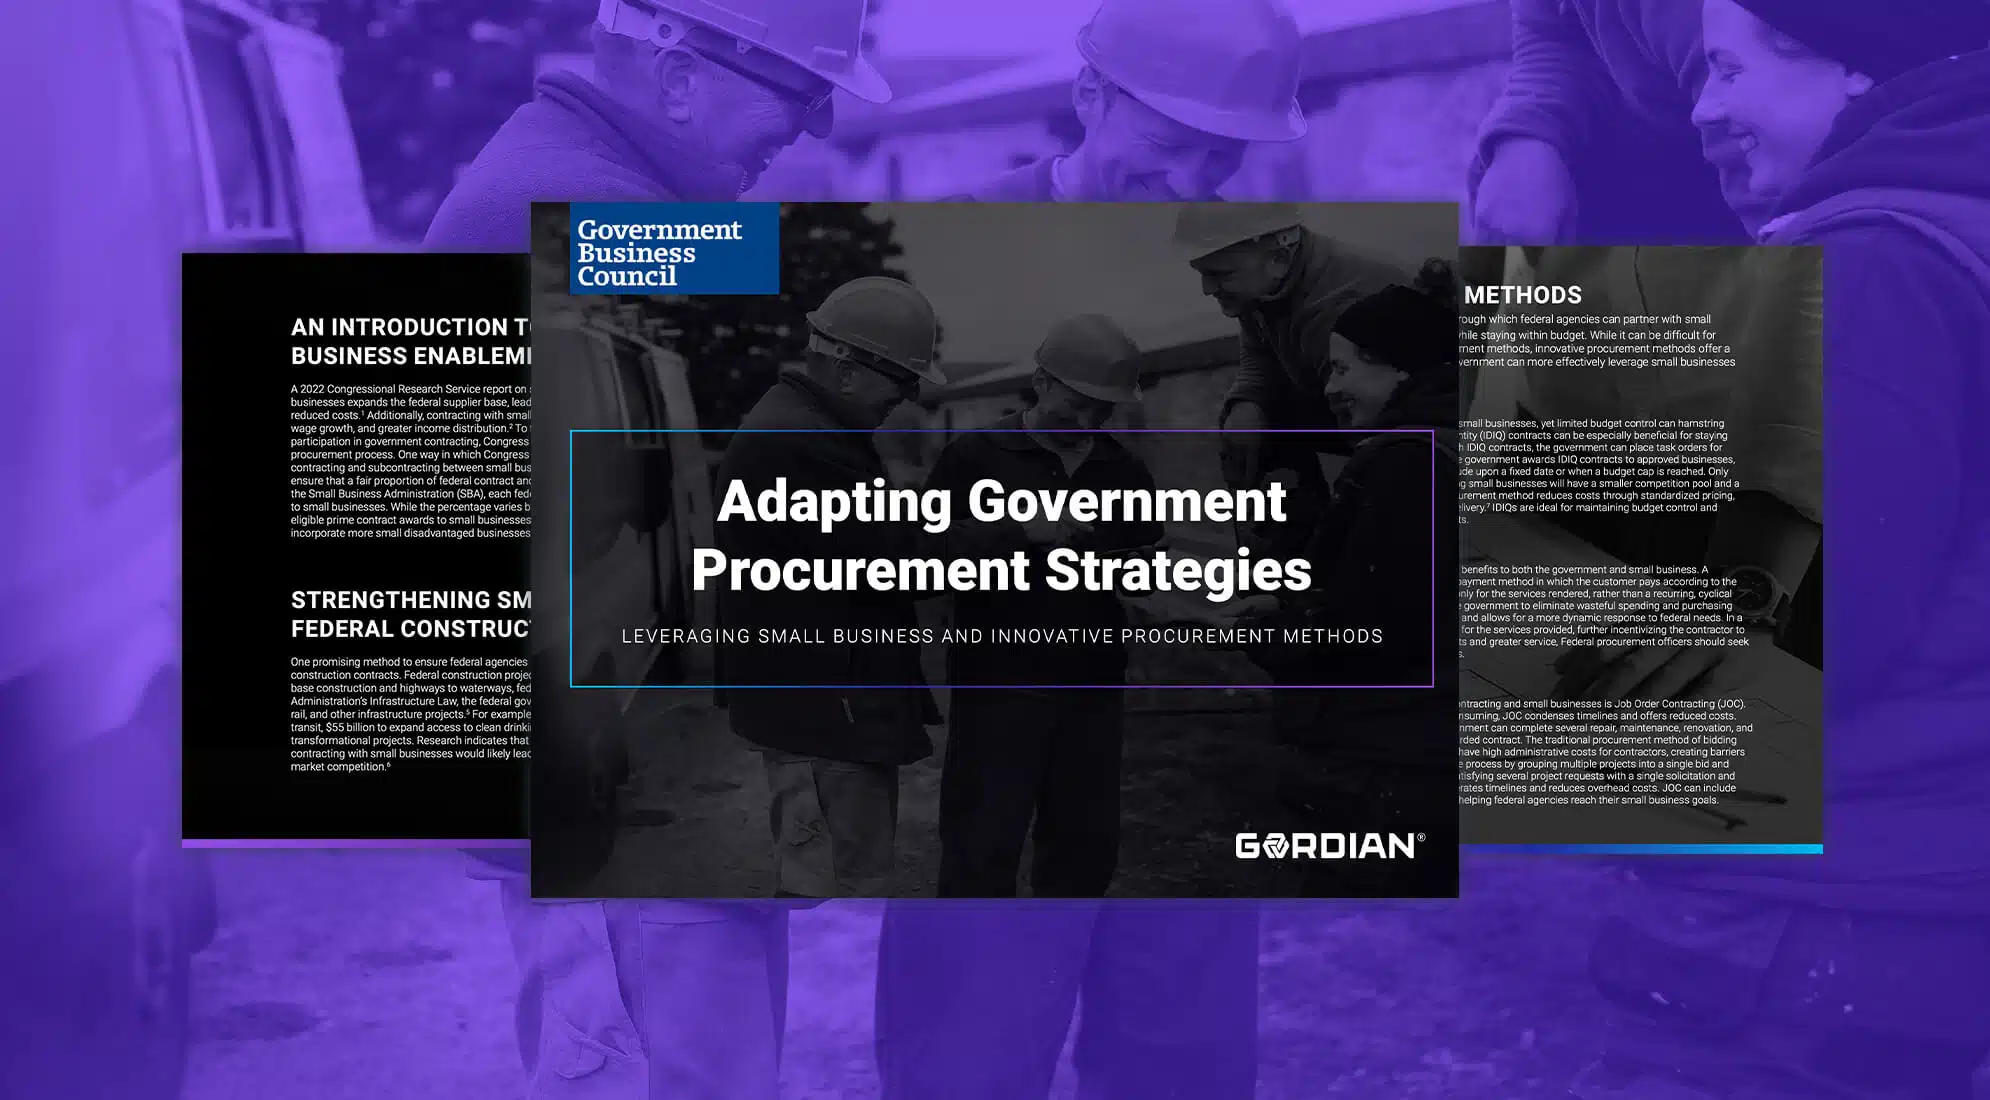 Federal Small Business Enablement through Innovative Procurement Methods